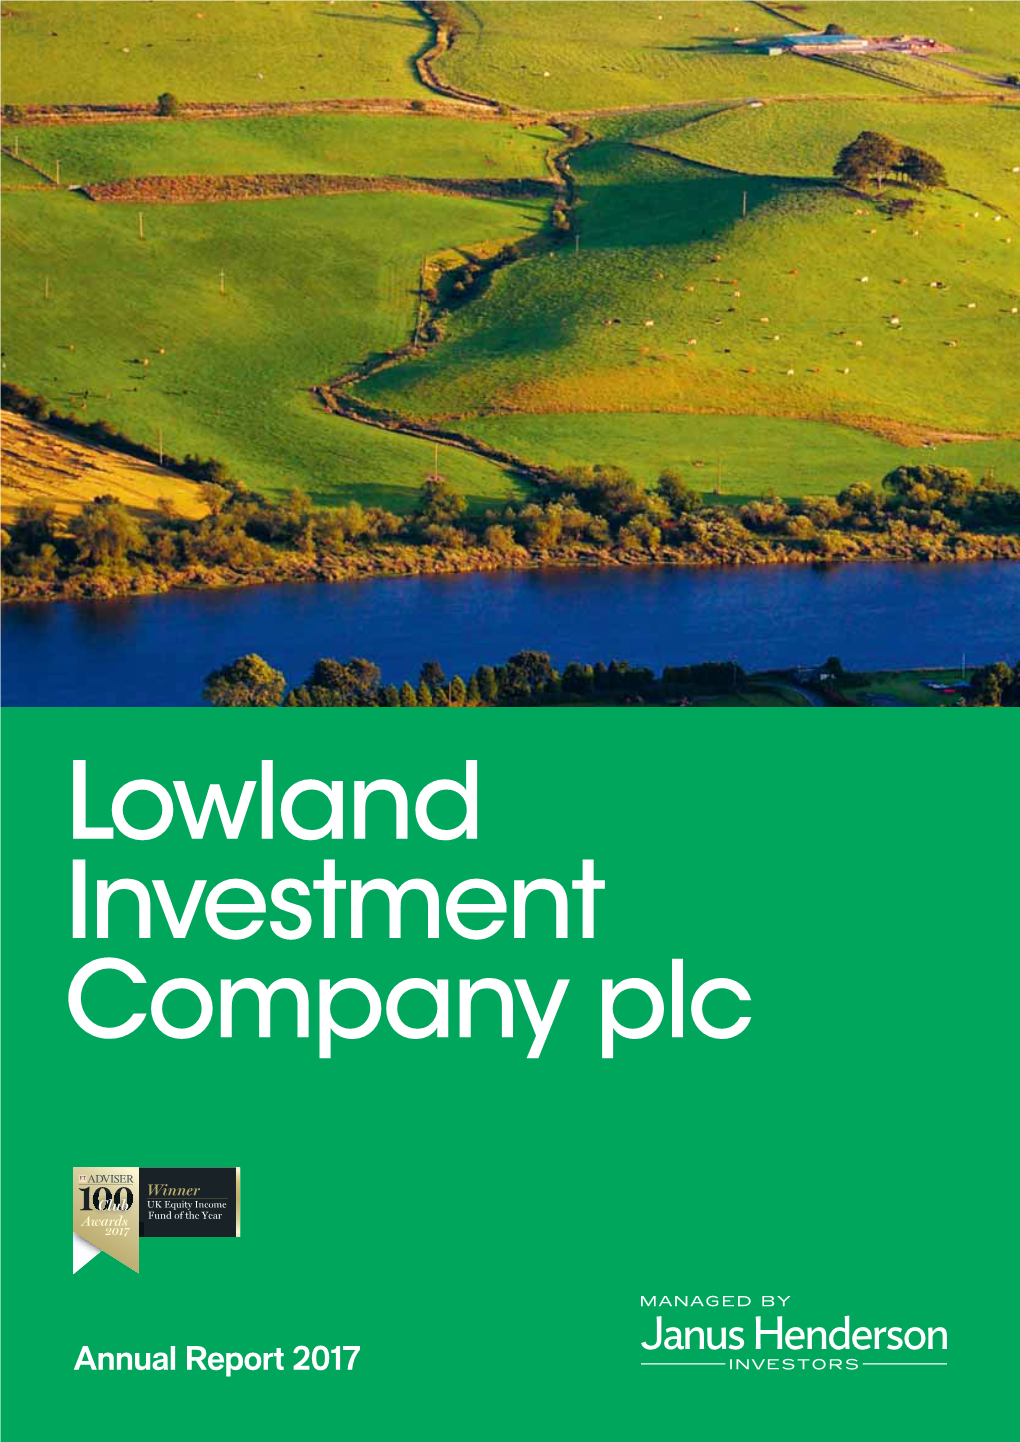 Lowland Investment Company